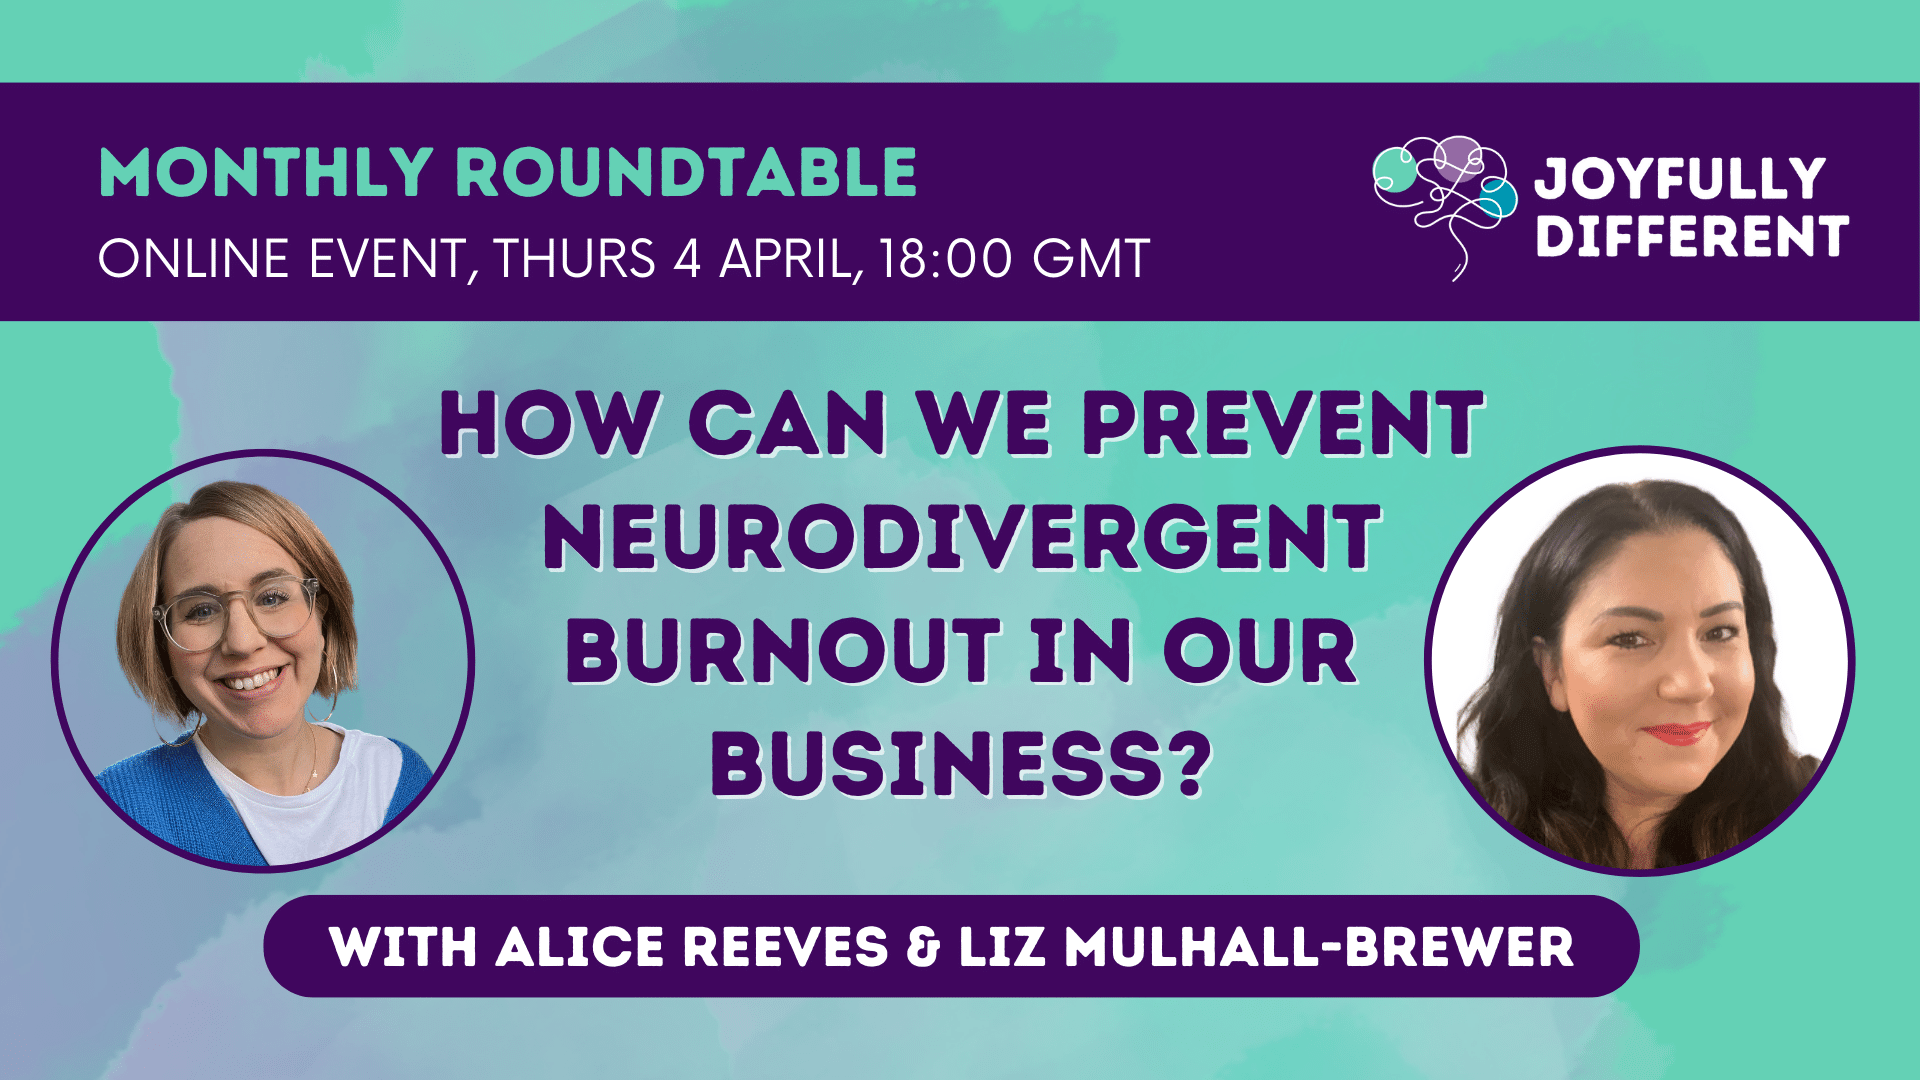 Online Roundtable: How Can We Prevent Neurodivergent Burnout In Business?